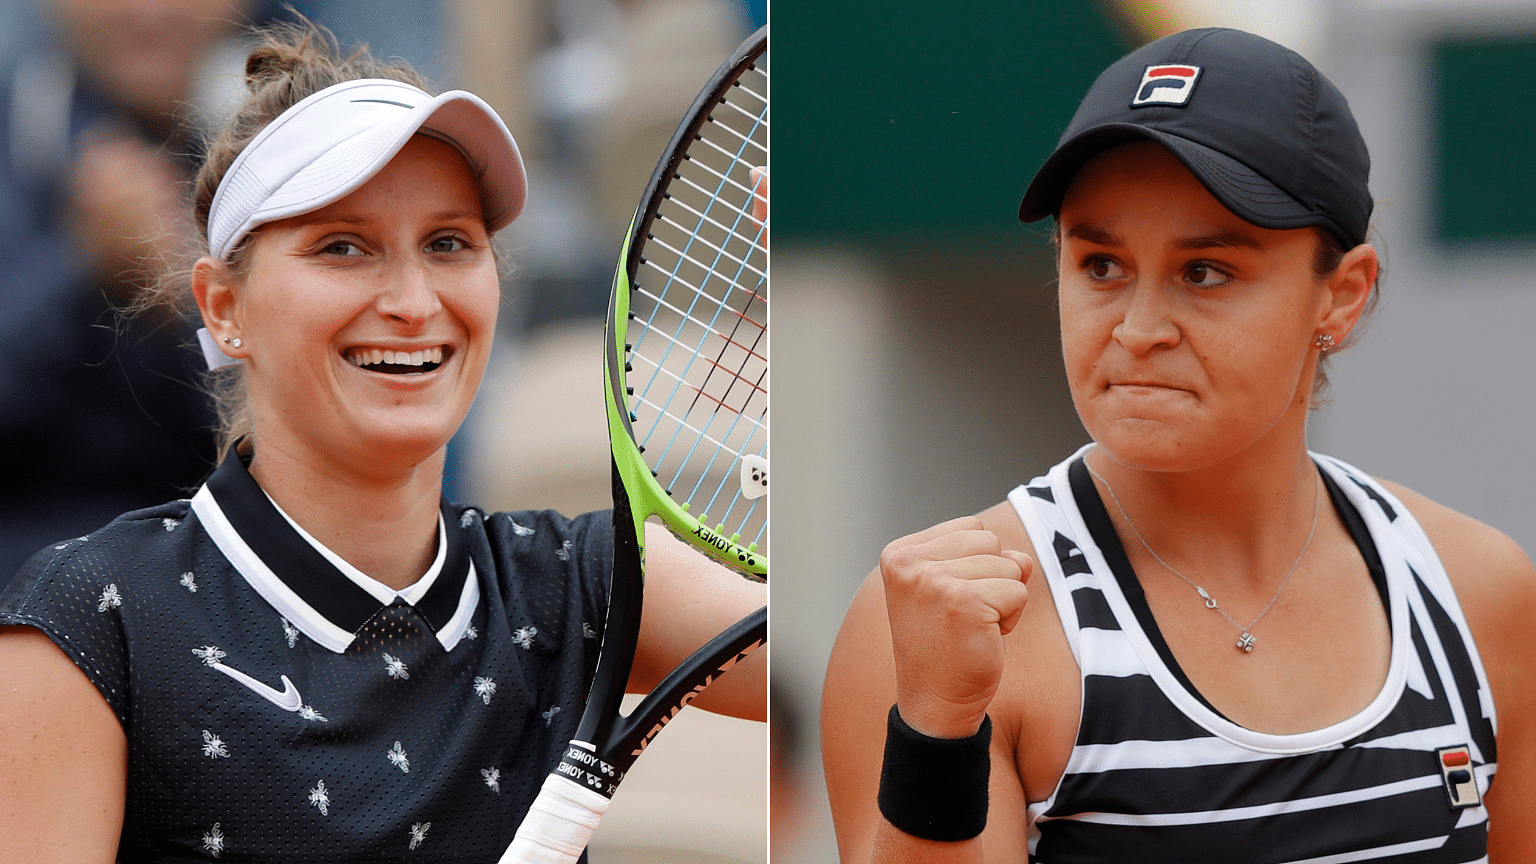 Ash Barty takes on unseeded teen for the championship: 19-year-old Marketa Vondrousova of the Czech Republic.